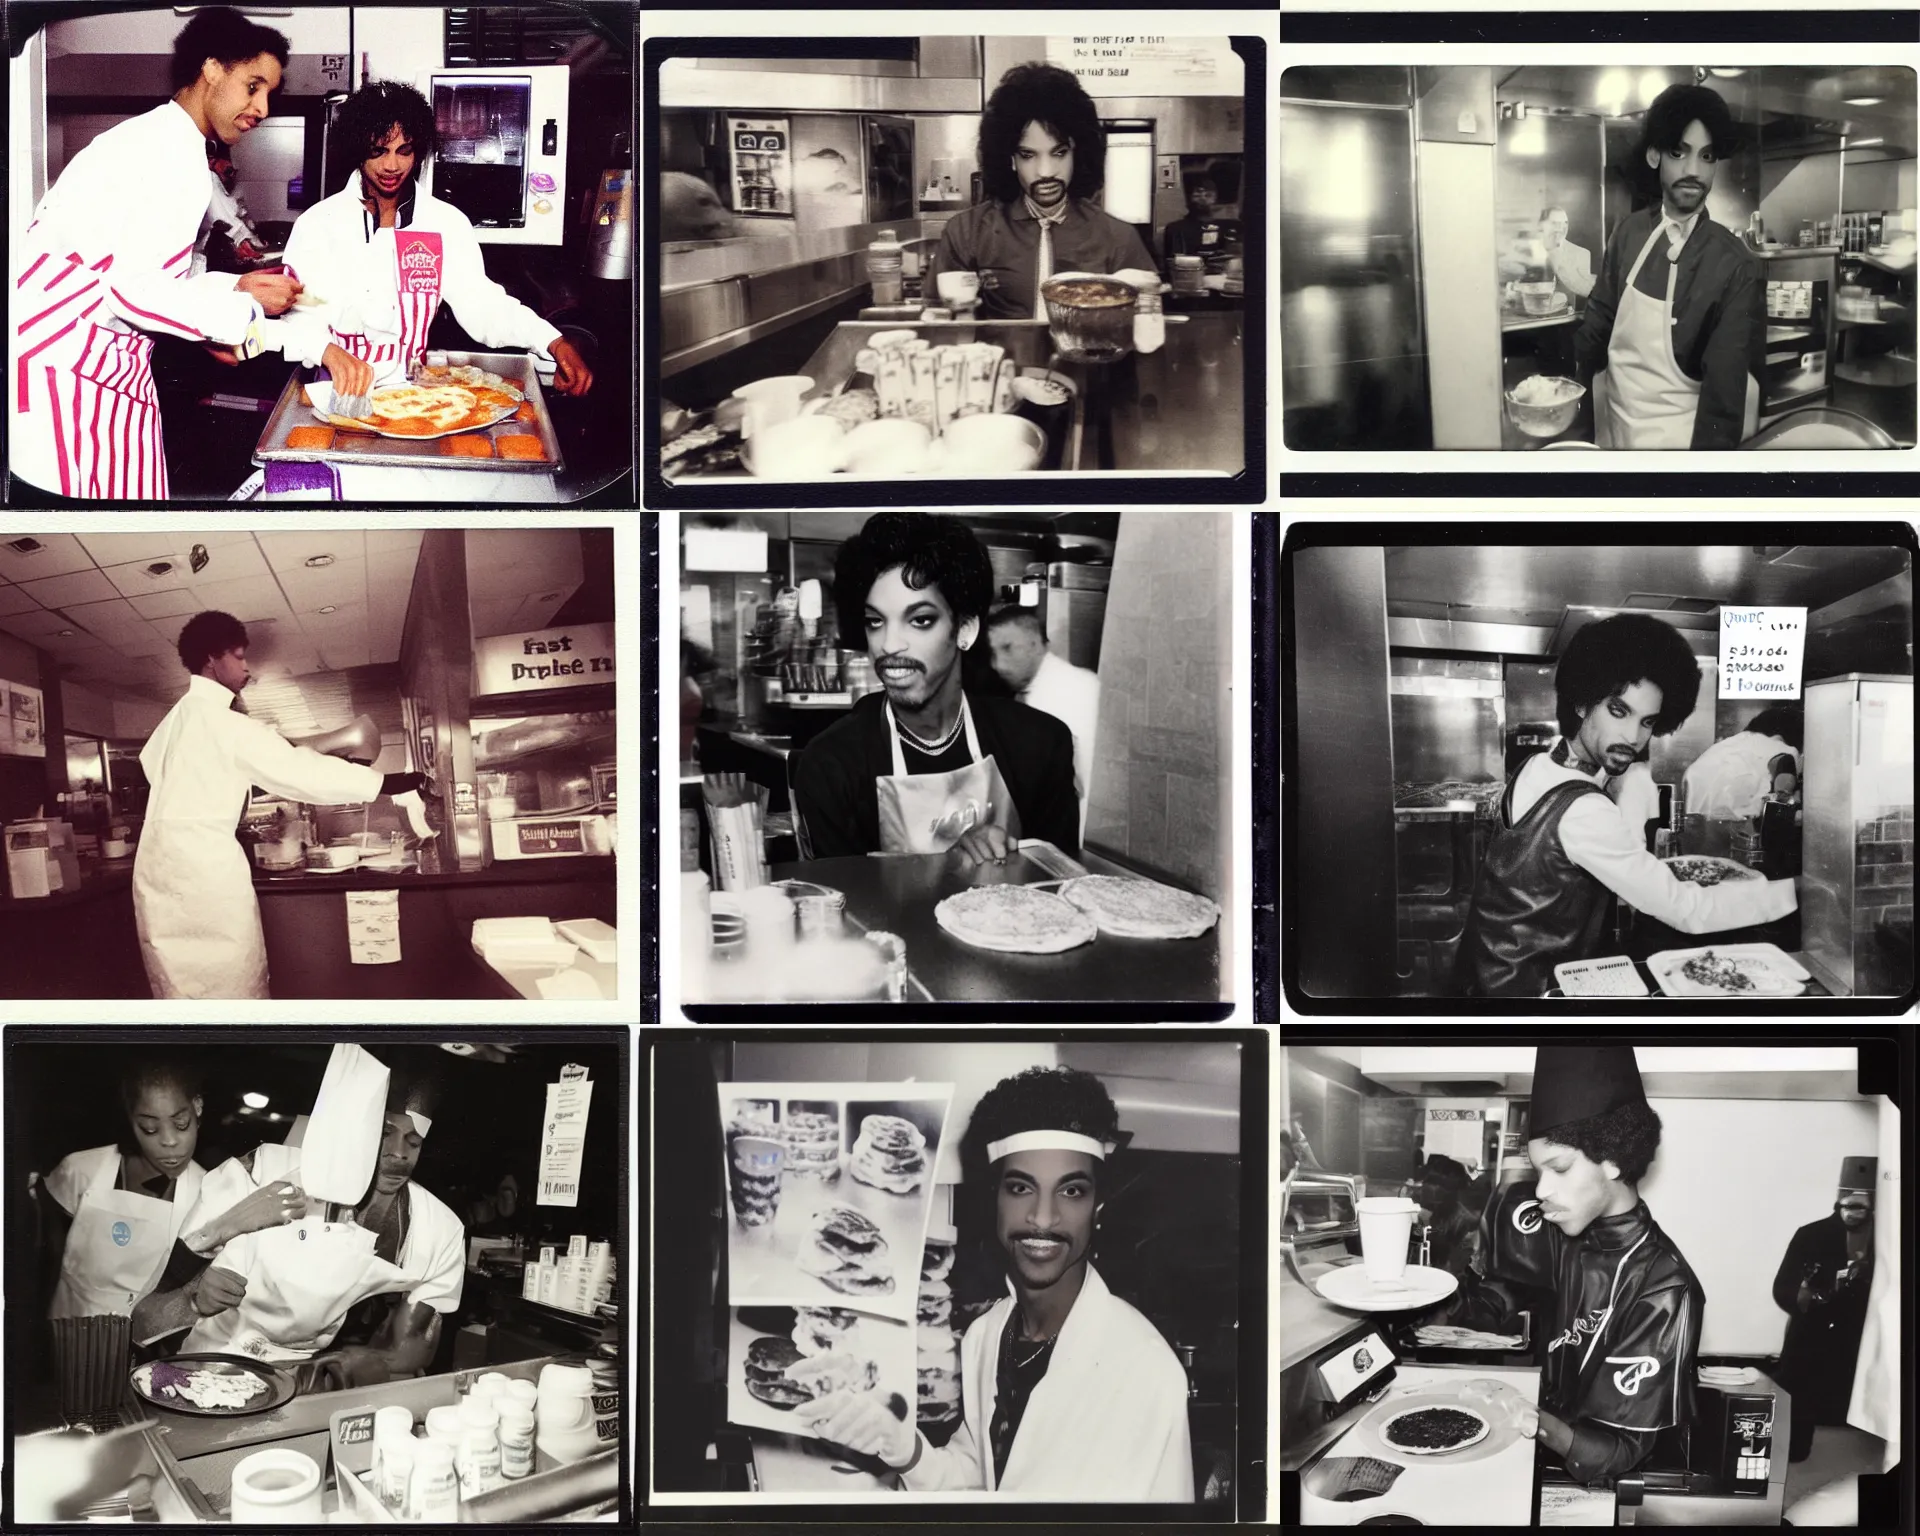 Prompt: close up of prince rogers nelson working at fast food place, serving pancakes, polaroid